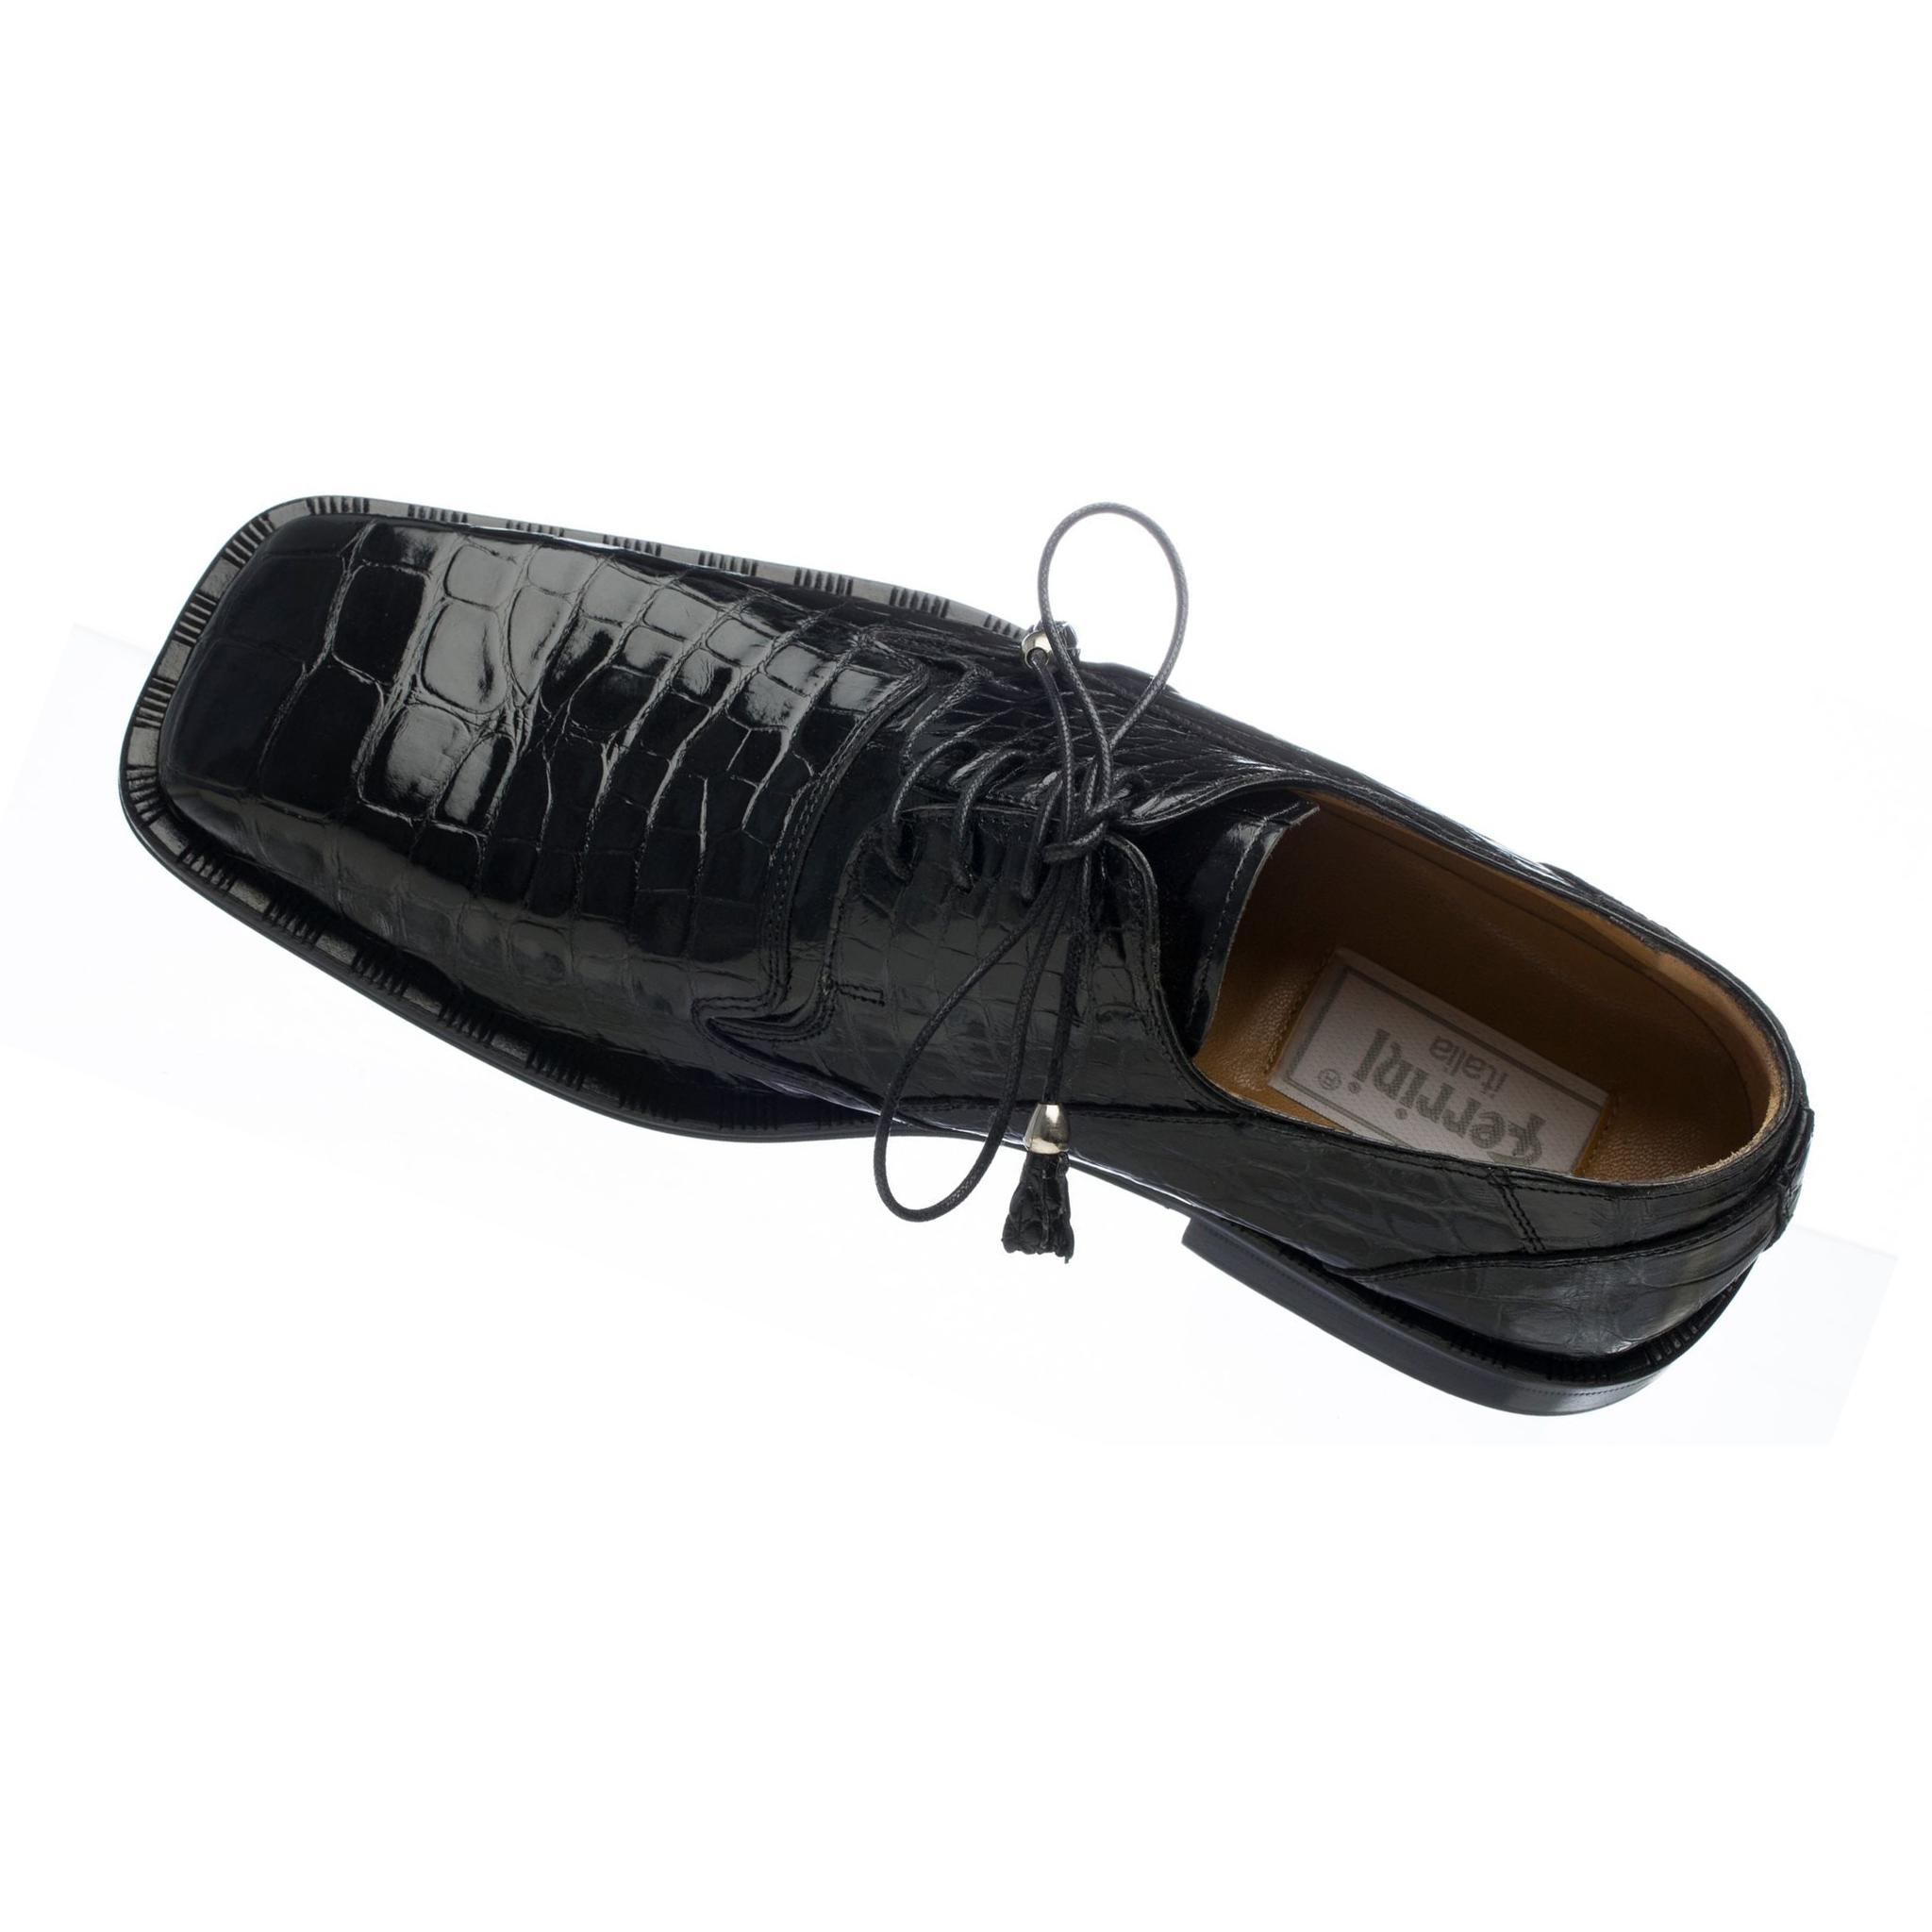 Ferrini Women's Cowhide Print Casual Boat Shoes at Tractor Supply Co.